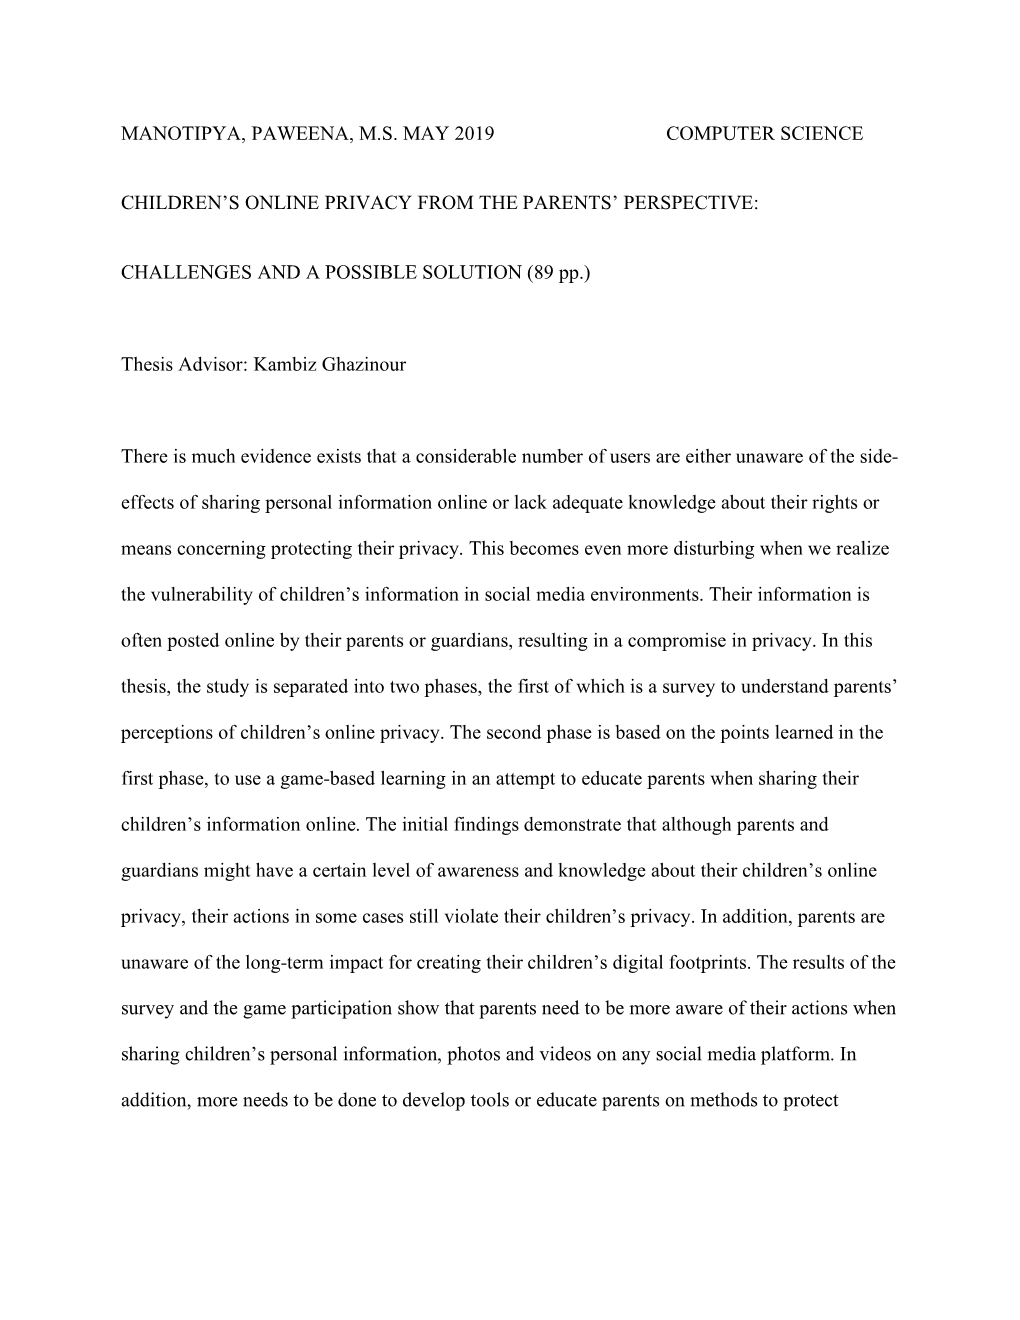 Manotipya, Paweena, M.S. May 2019 Computer Science Children's Online Privacy from the Parents' Perspective: Challenges and A